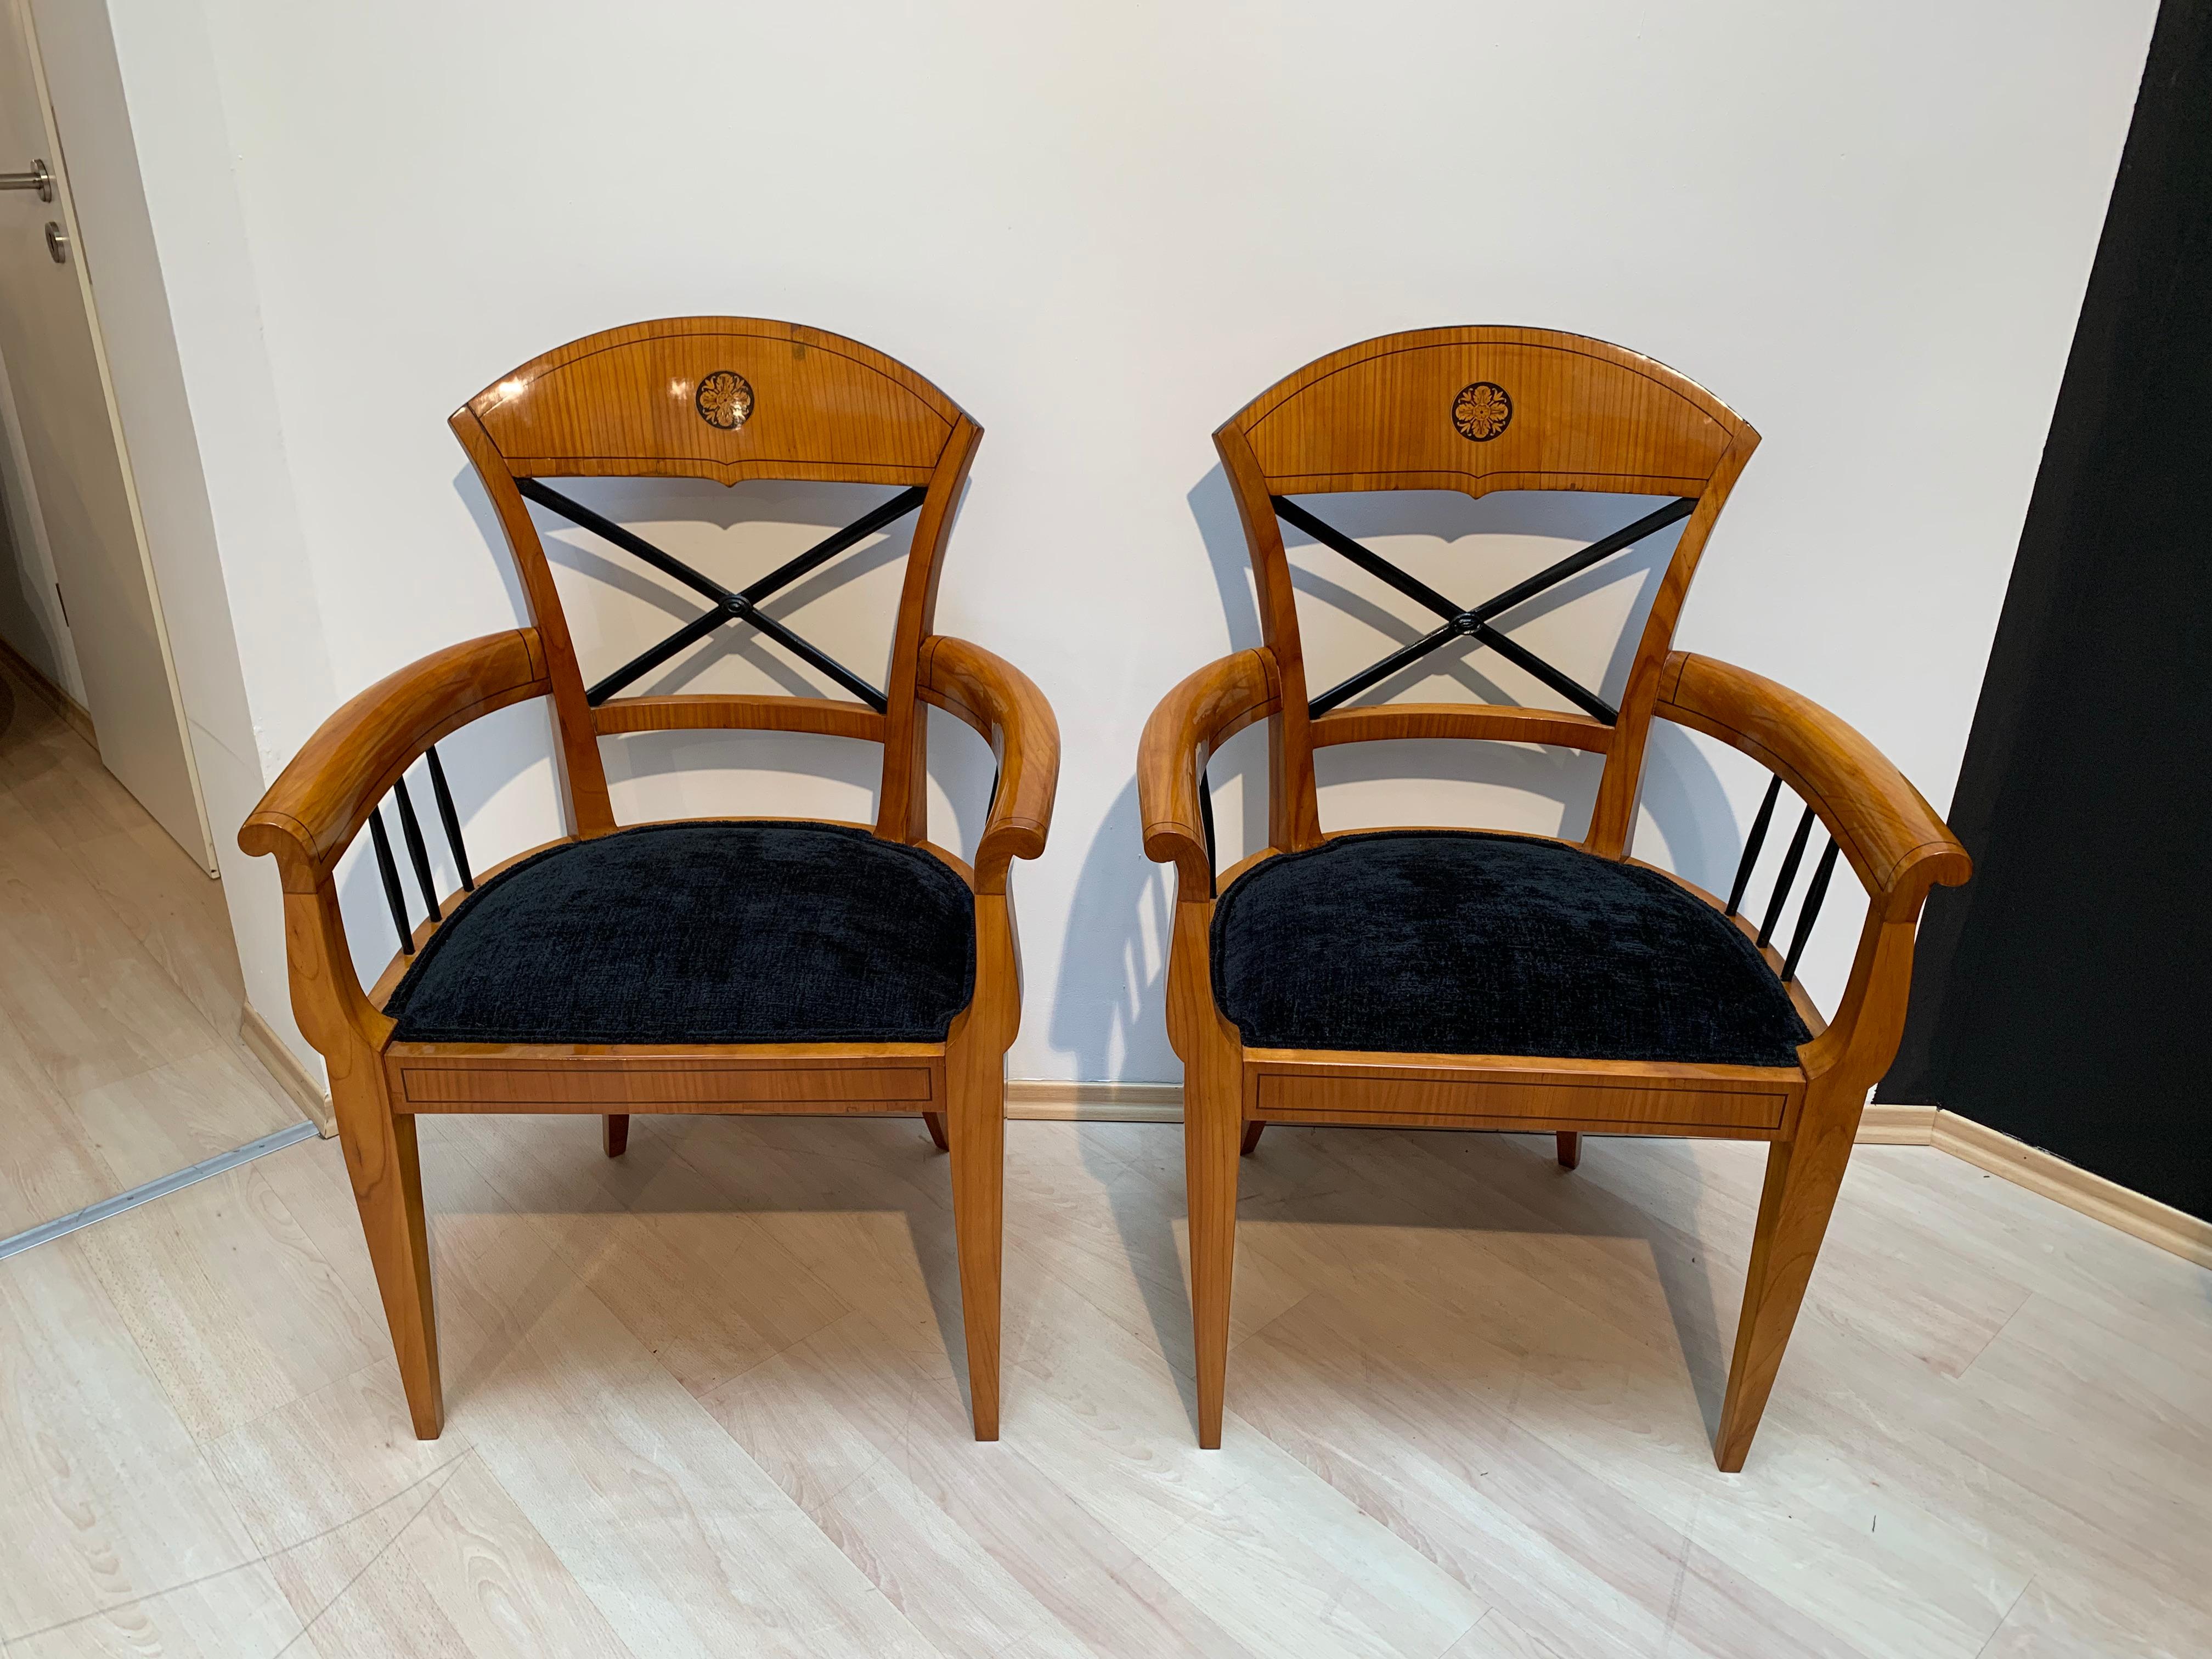 Lovely original pair of restored neoclassical Biedermeier Armchairs from Austria about 1900. 

Bright cherry veneer and solid wood, french polished with shellac by hand. Ebony band inlays on the frame and shield in the backrest. Ebonized cross in